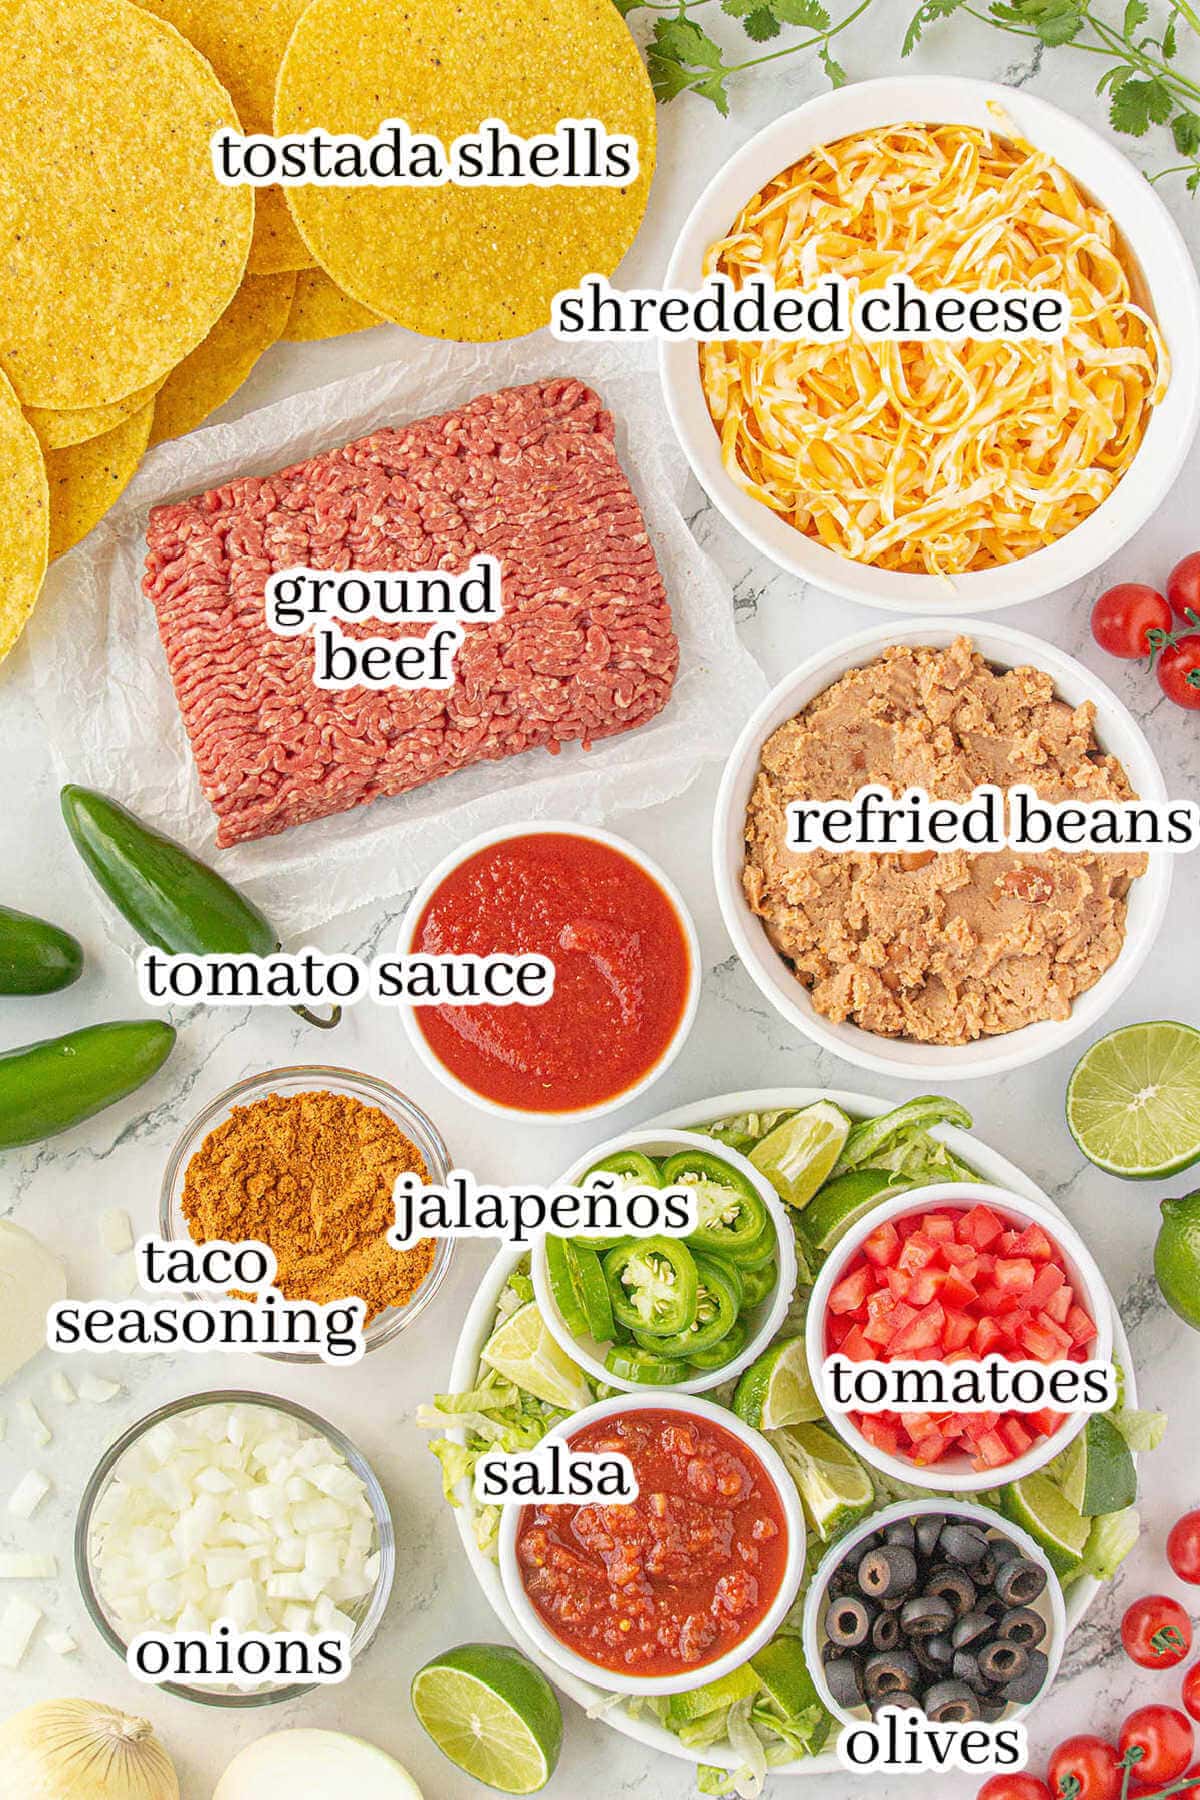 Ingredients to make ground beef tostada recipe, with print overlay.